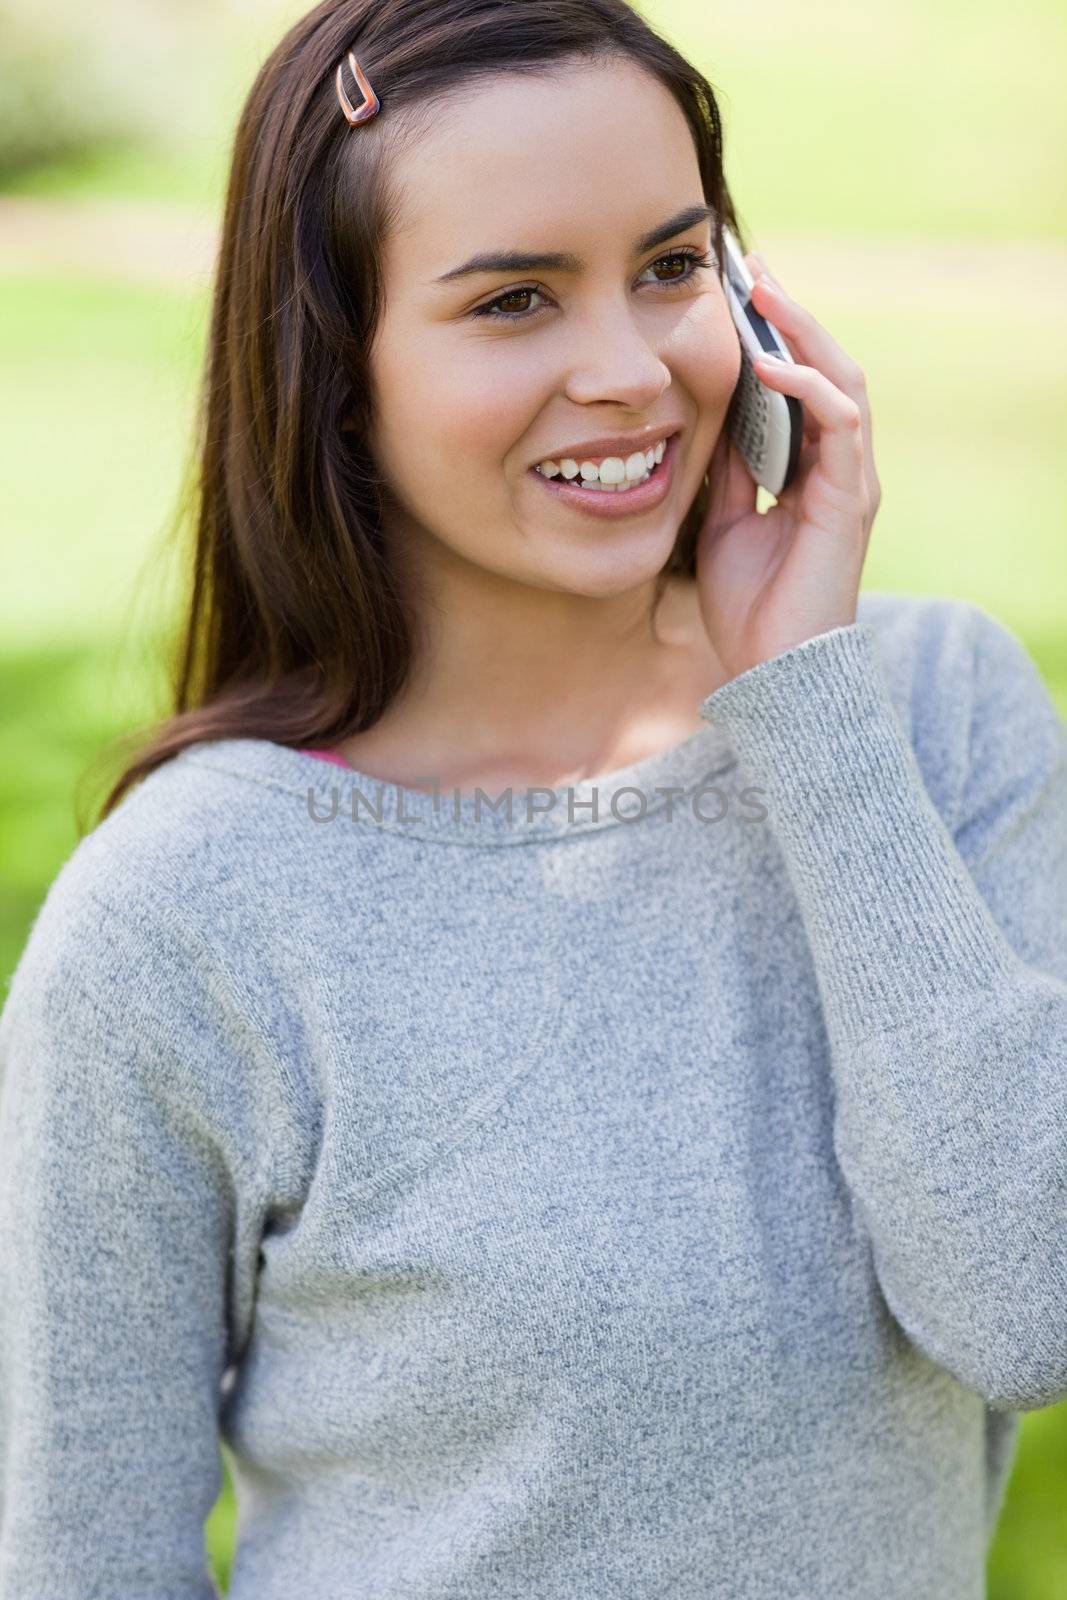 Young girl using her mobile phone while standing in a park by Wavebreakmedia